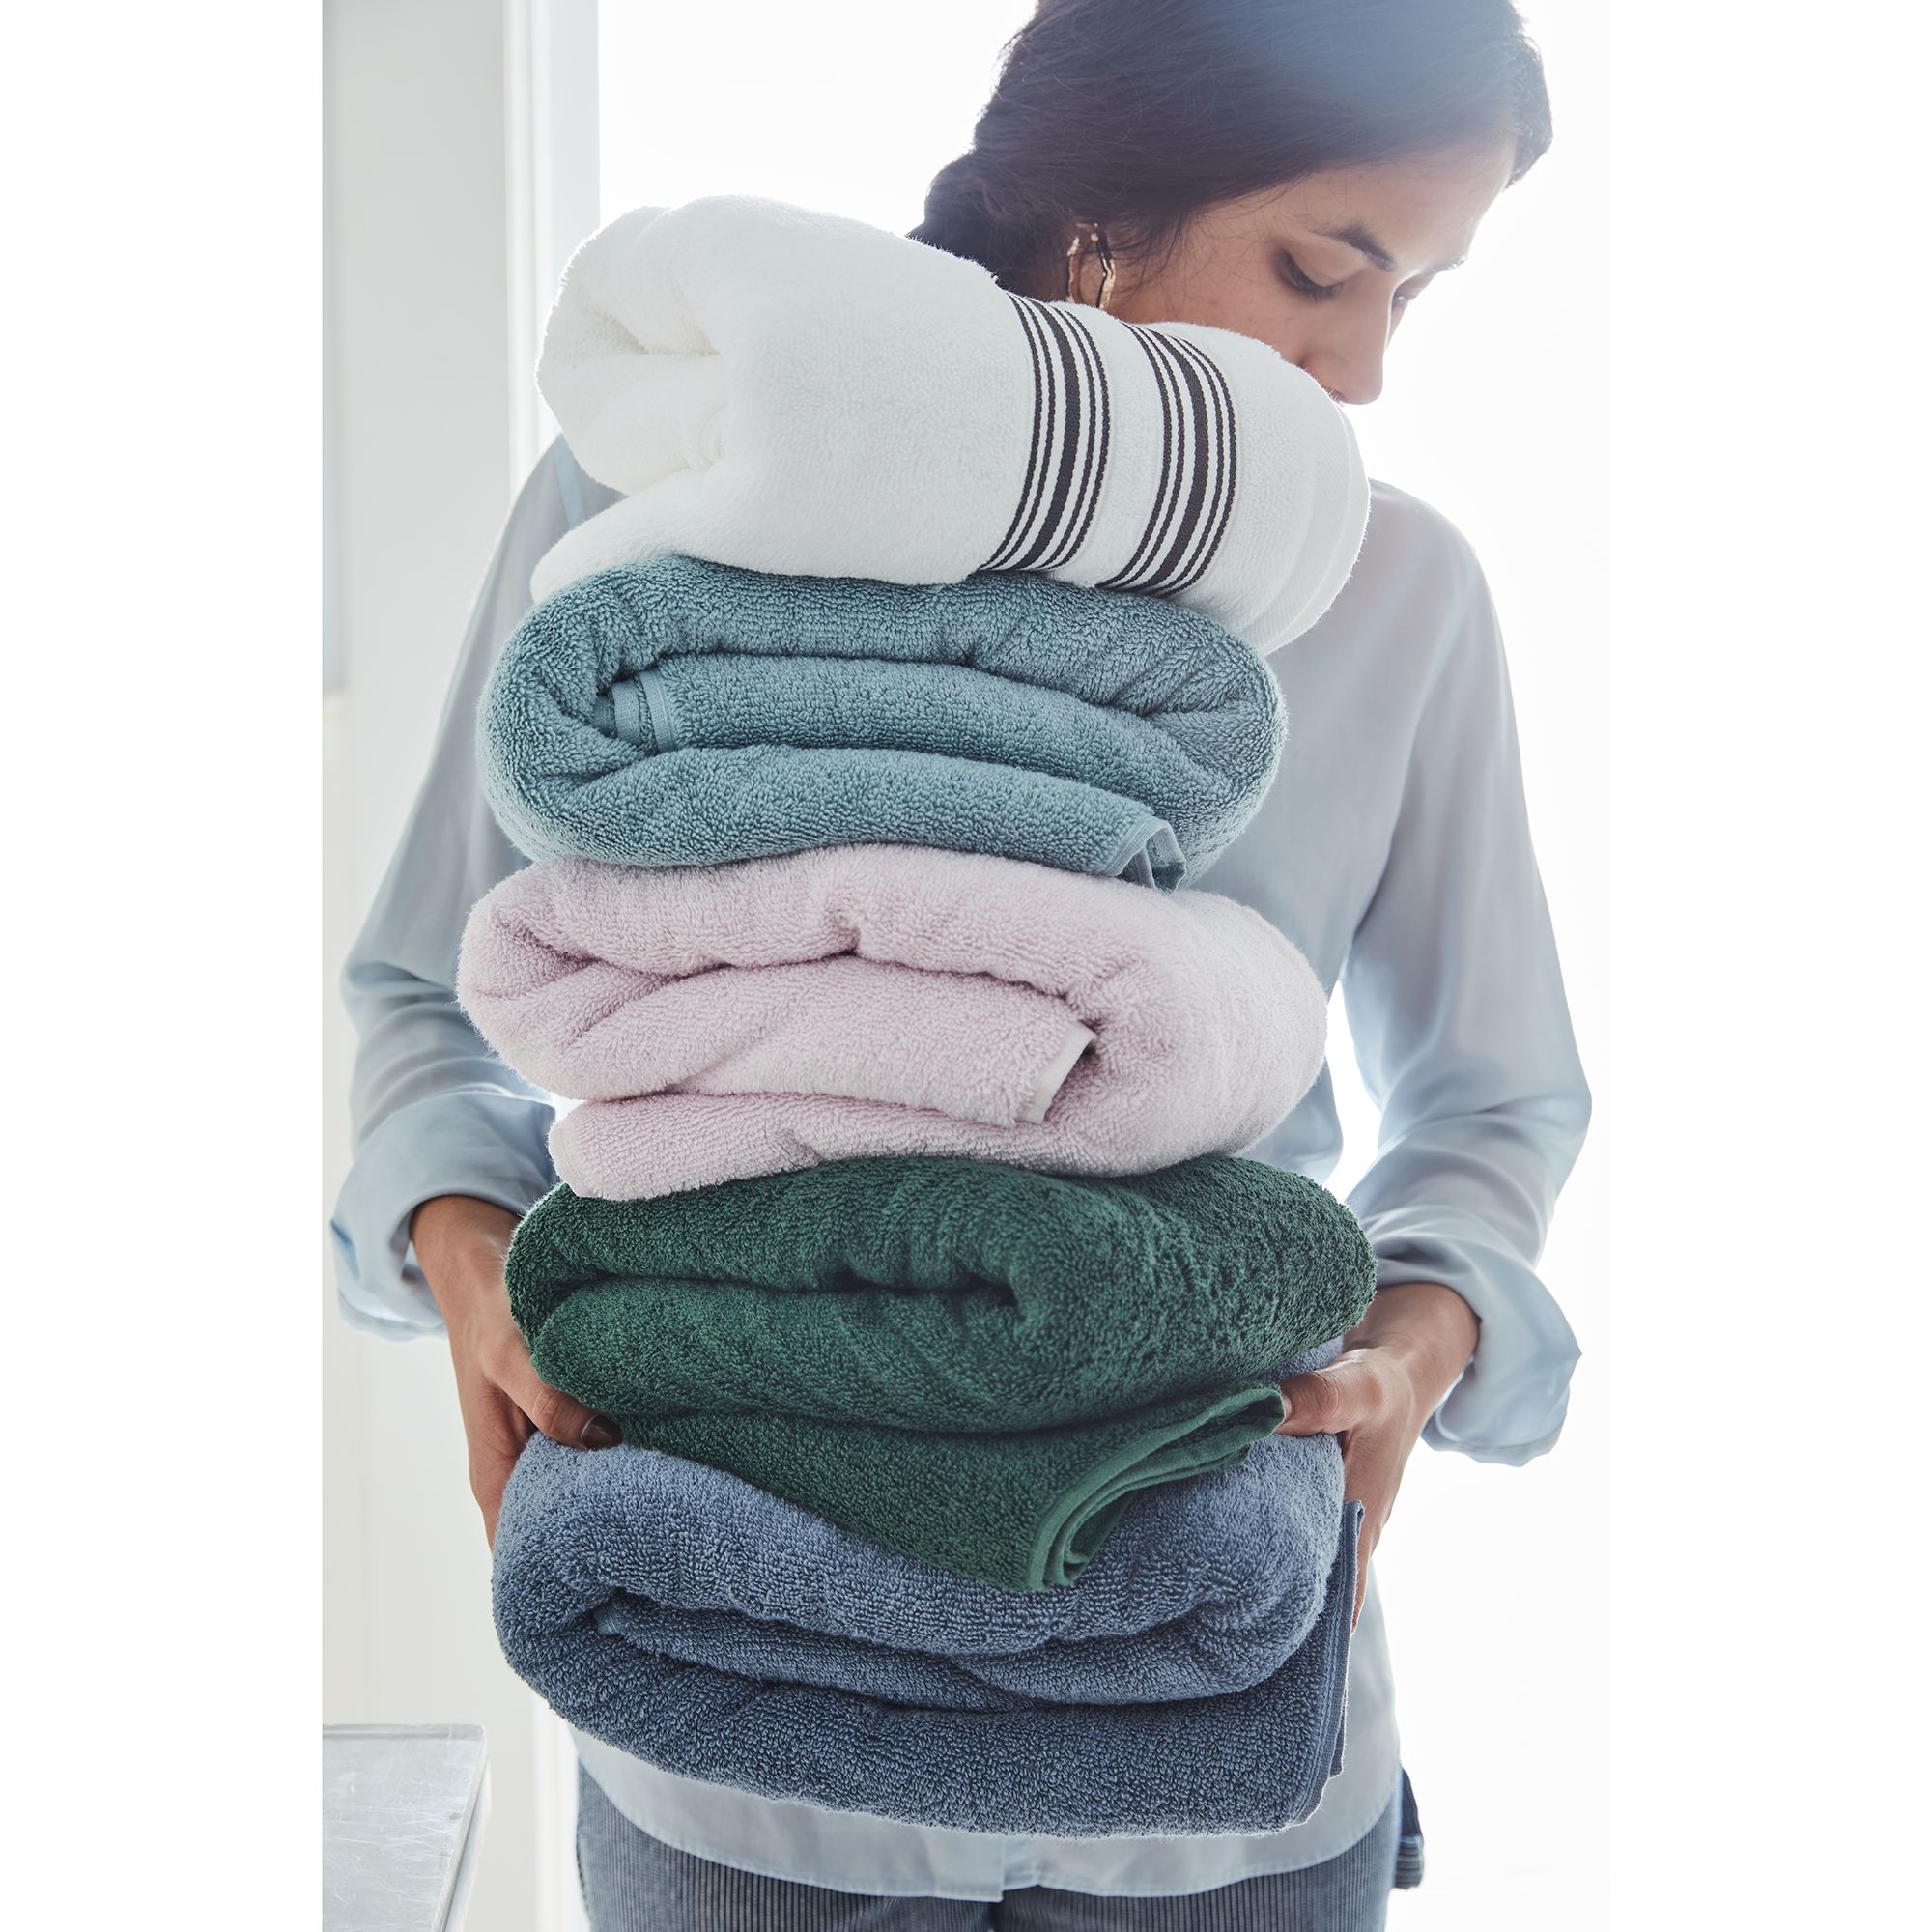 Nestwell Hygro Cotton Towels: Bath Towel $5, Hand Towel $4, Washcloth $3 at Bed Bath & Beyond w/ Free Store Pickup or Free S&H w/ $39+